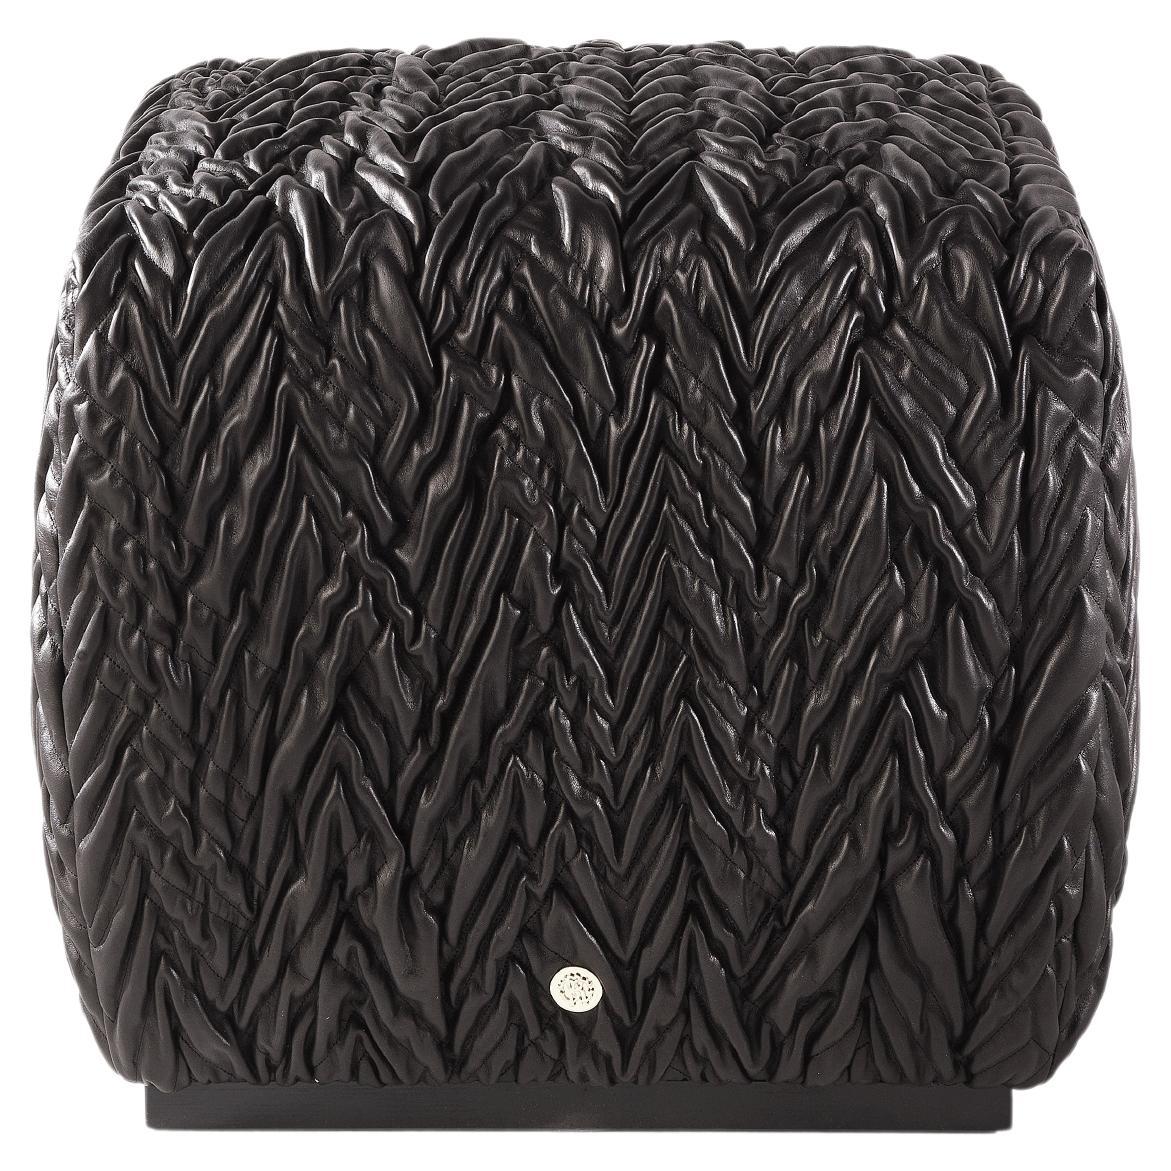 21st Century Waddi Pouf in Black Leather by Roberto Cavalli Home Interiors For Sale